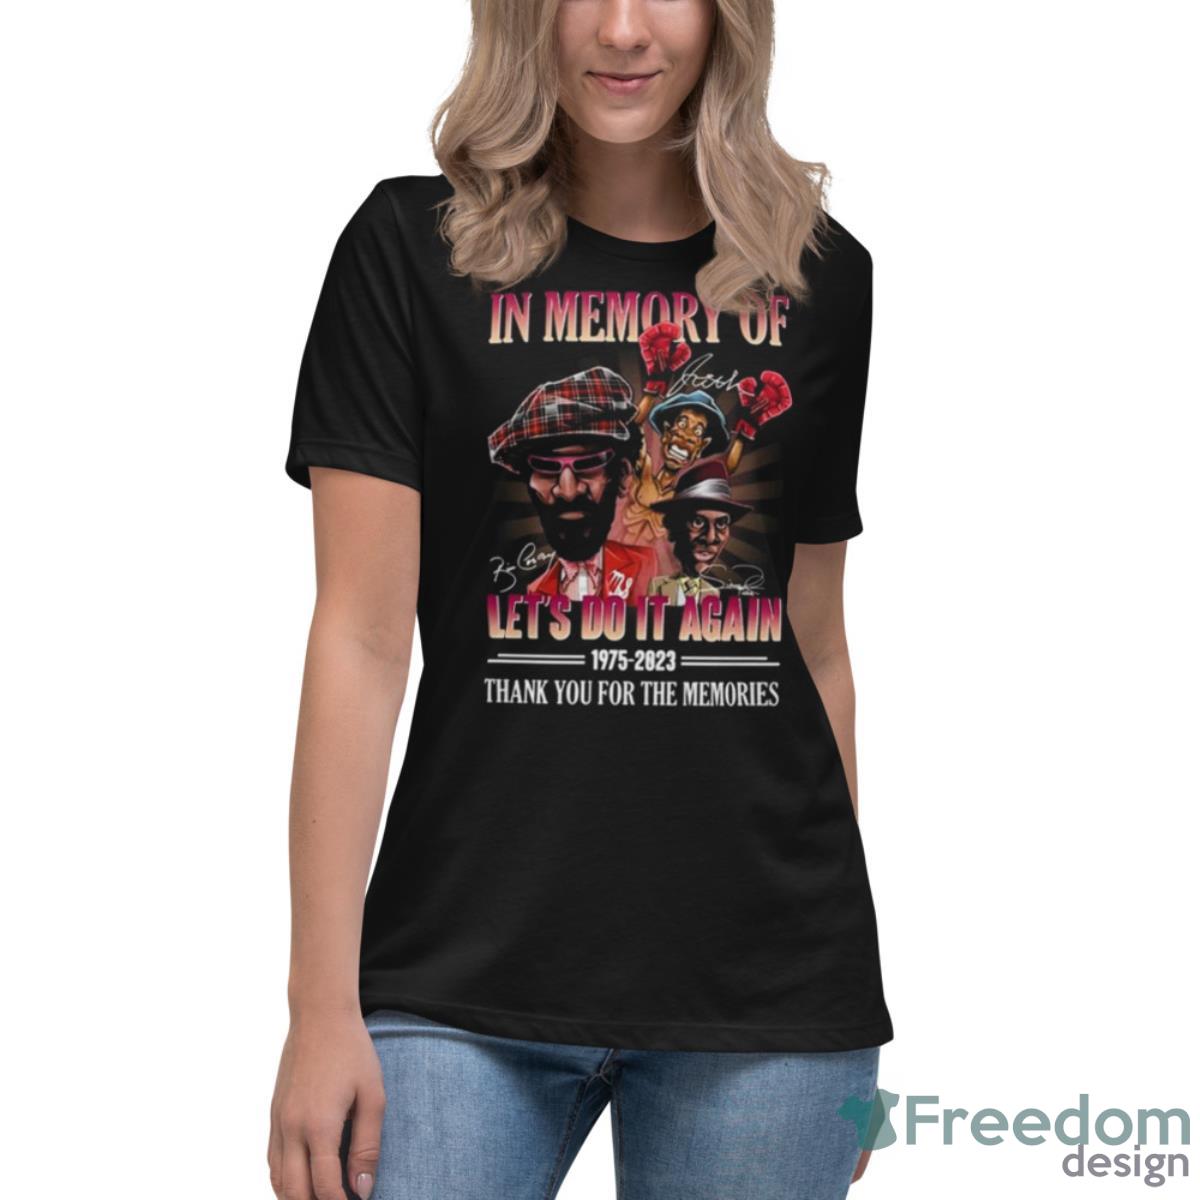 In Memory Of Let’s Do It Again Movies 1975 – 2023 Thank You For The Memories Signatures Shirt